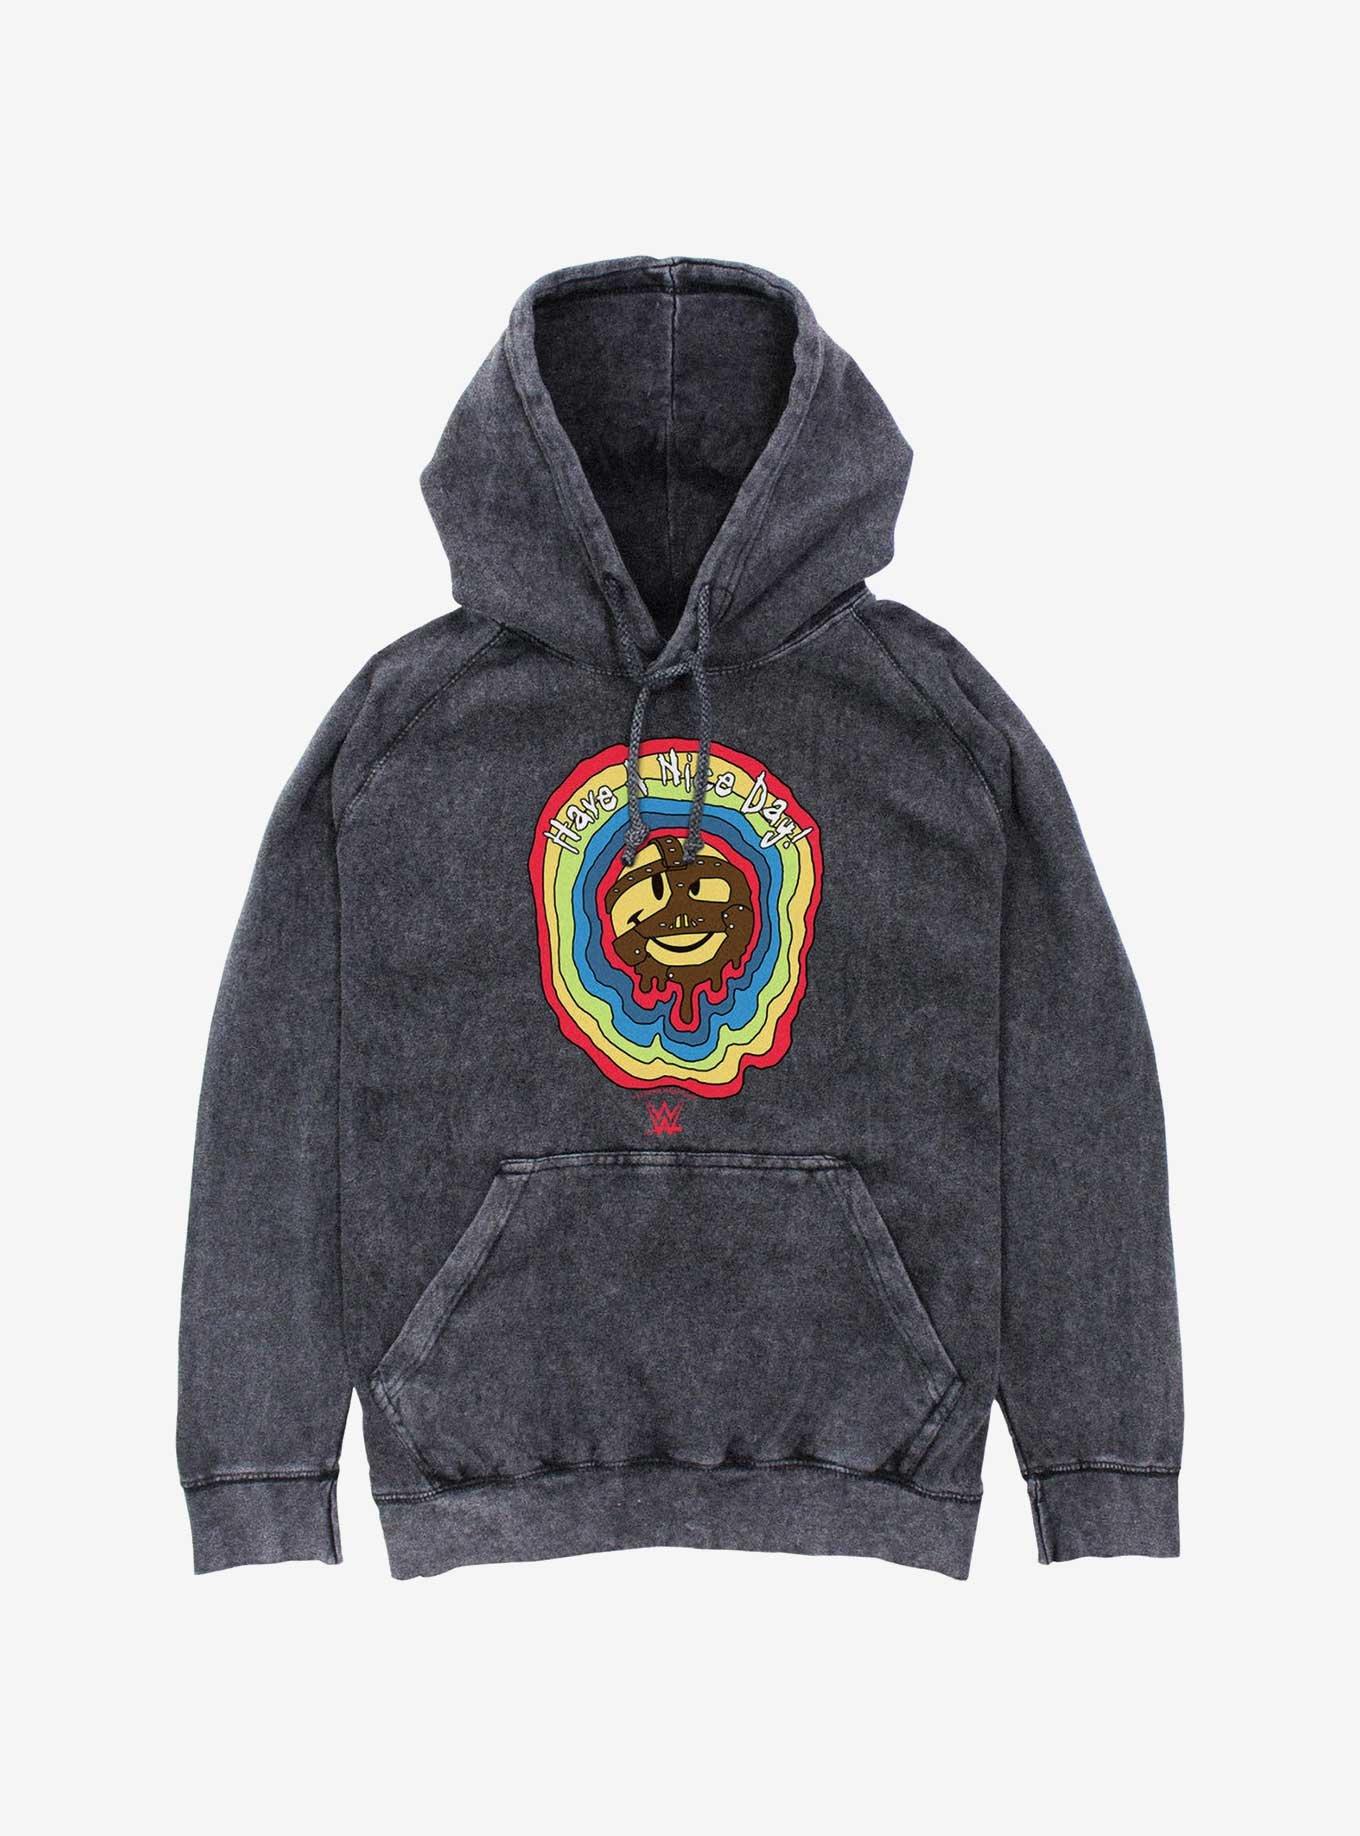 WWE Mick Foley Mankind Have A Nice Day! Mineral Wash Hoodie, BLACK, hi-res